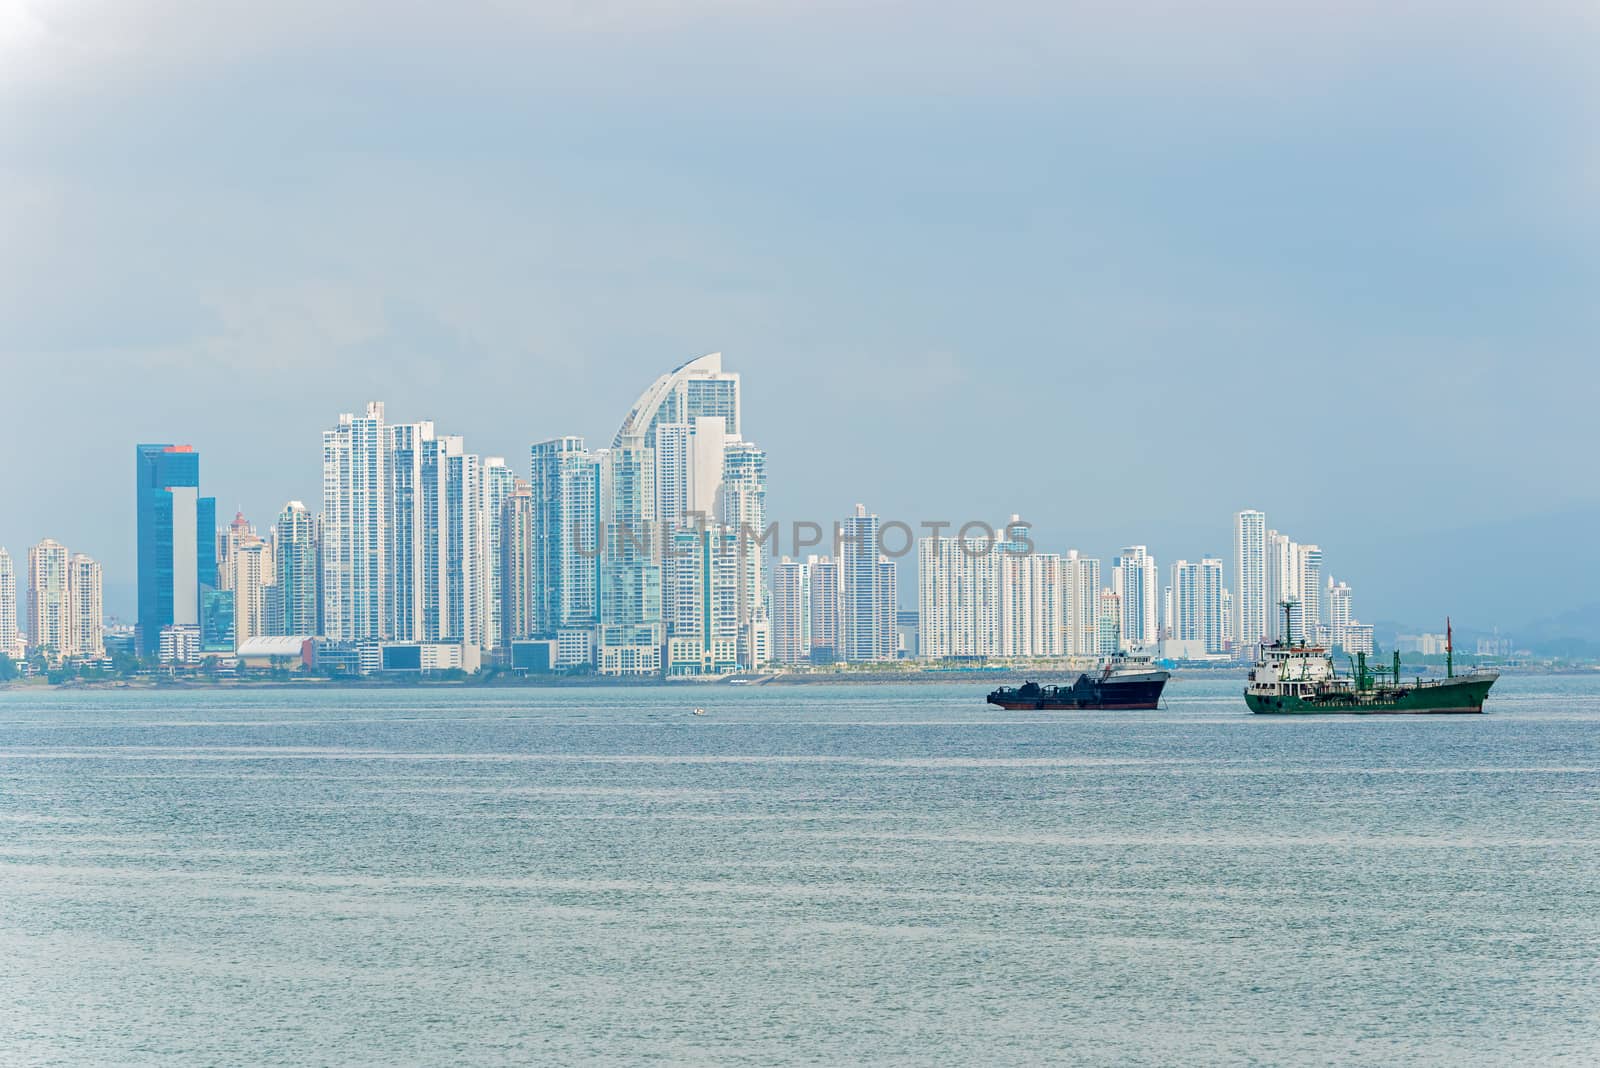 Shipping boats in Panama Bay on the background  Panama City skyscrapers skyline. Sunny day in January 2, 2014.